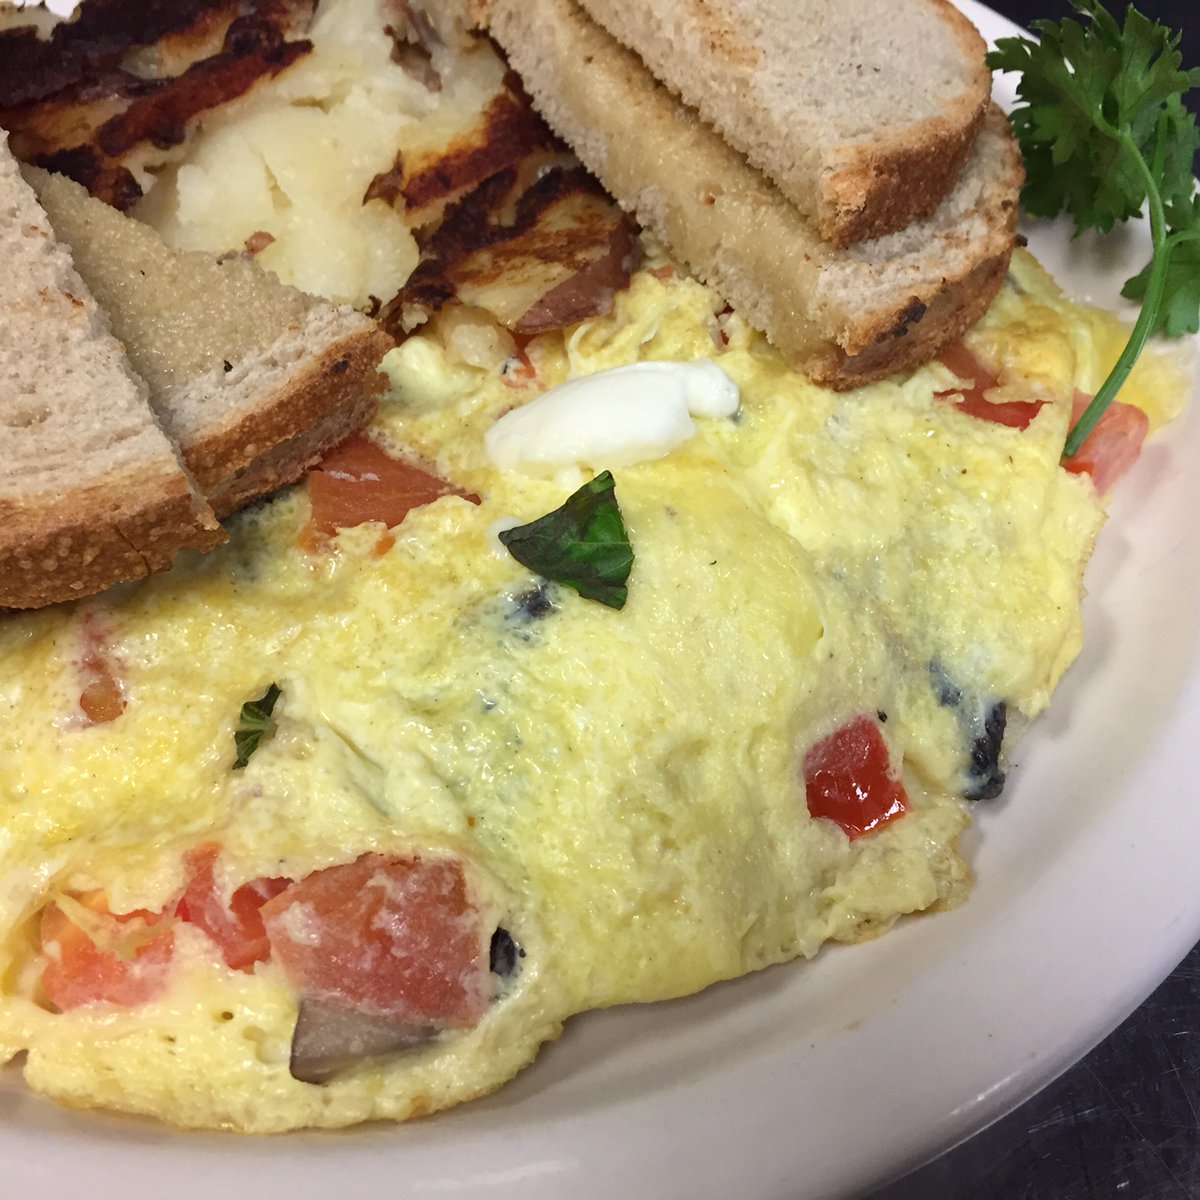 Our breakfast special this weekend is a Caprese Omelet! Enjoy one of our famous three egg omelets made with diced tomato, fresh basil, and fresh mozzarella cheese.   #capreseomelet #breakfastspecial #weekendspecial #omelets #breakfast #jakeseatery #newtownpa #richboropa